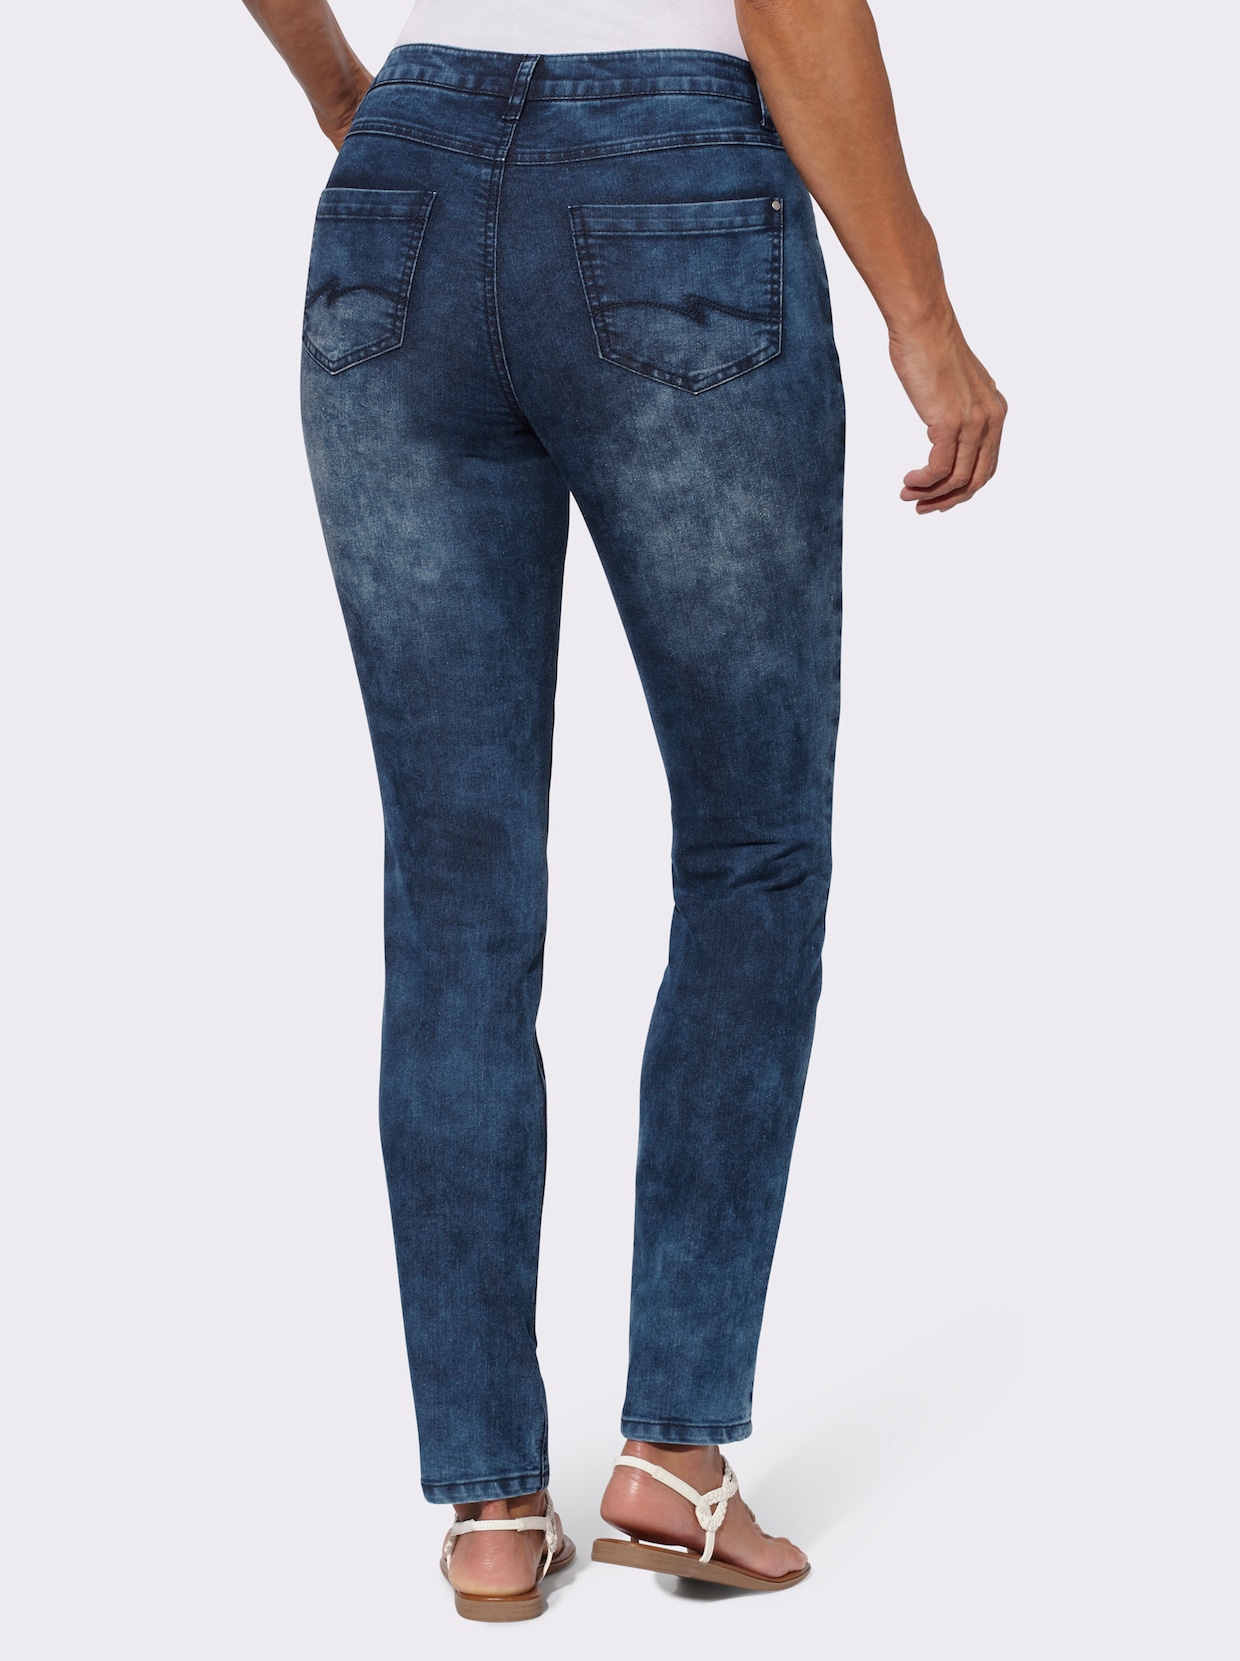 Jeans - darkblue-stone-washed